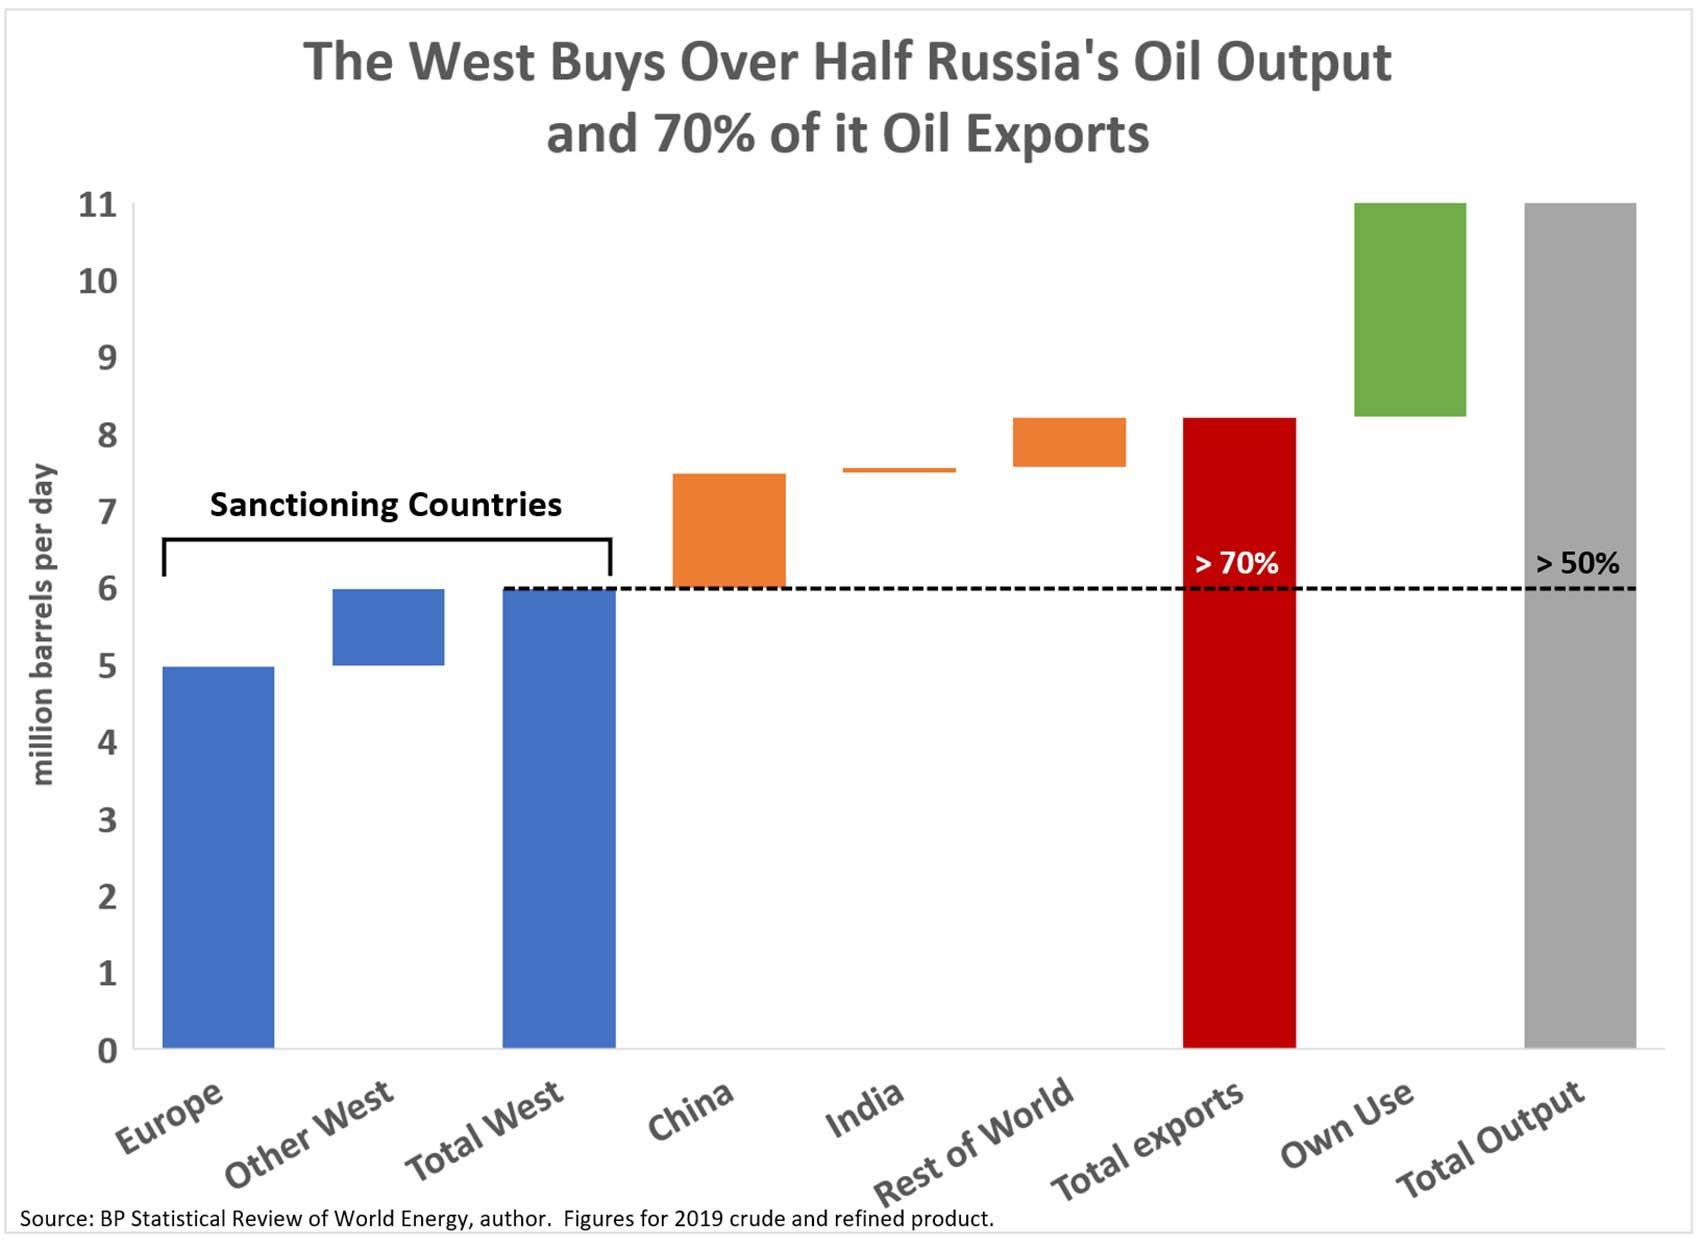 The West Buys Over Half Russia's Oil Output and 70% of Its Oil Exports